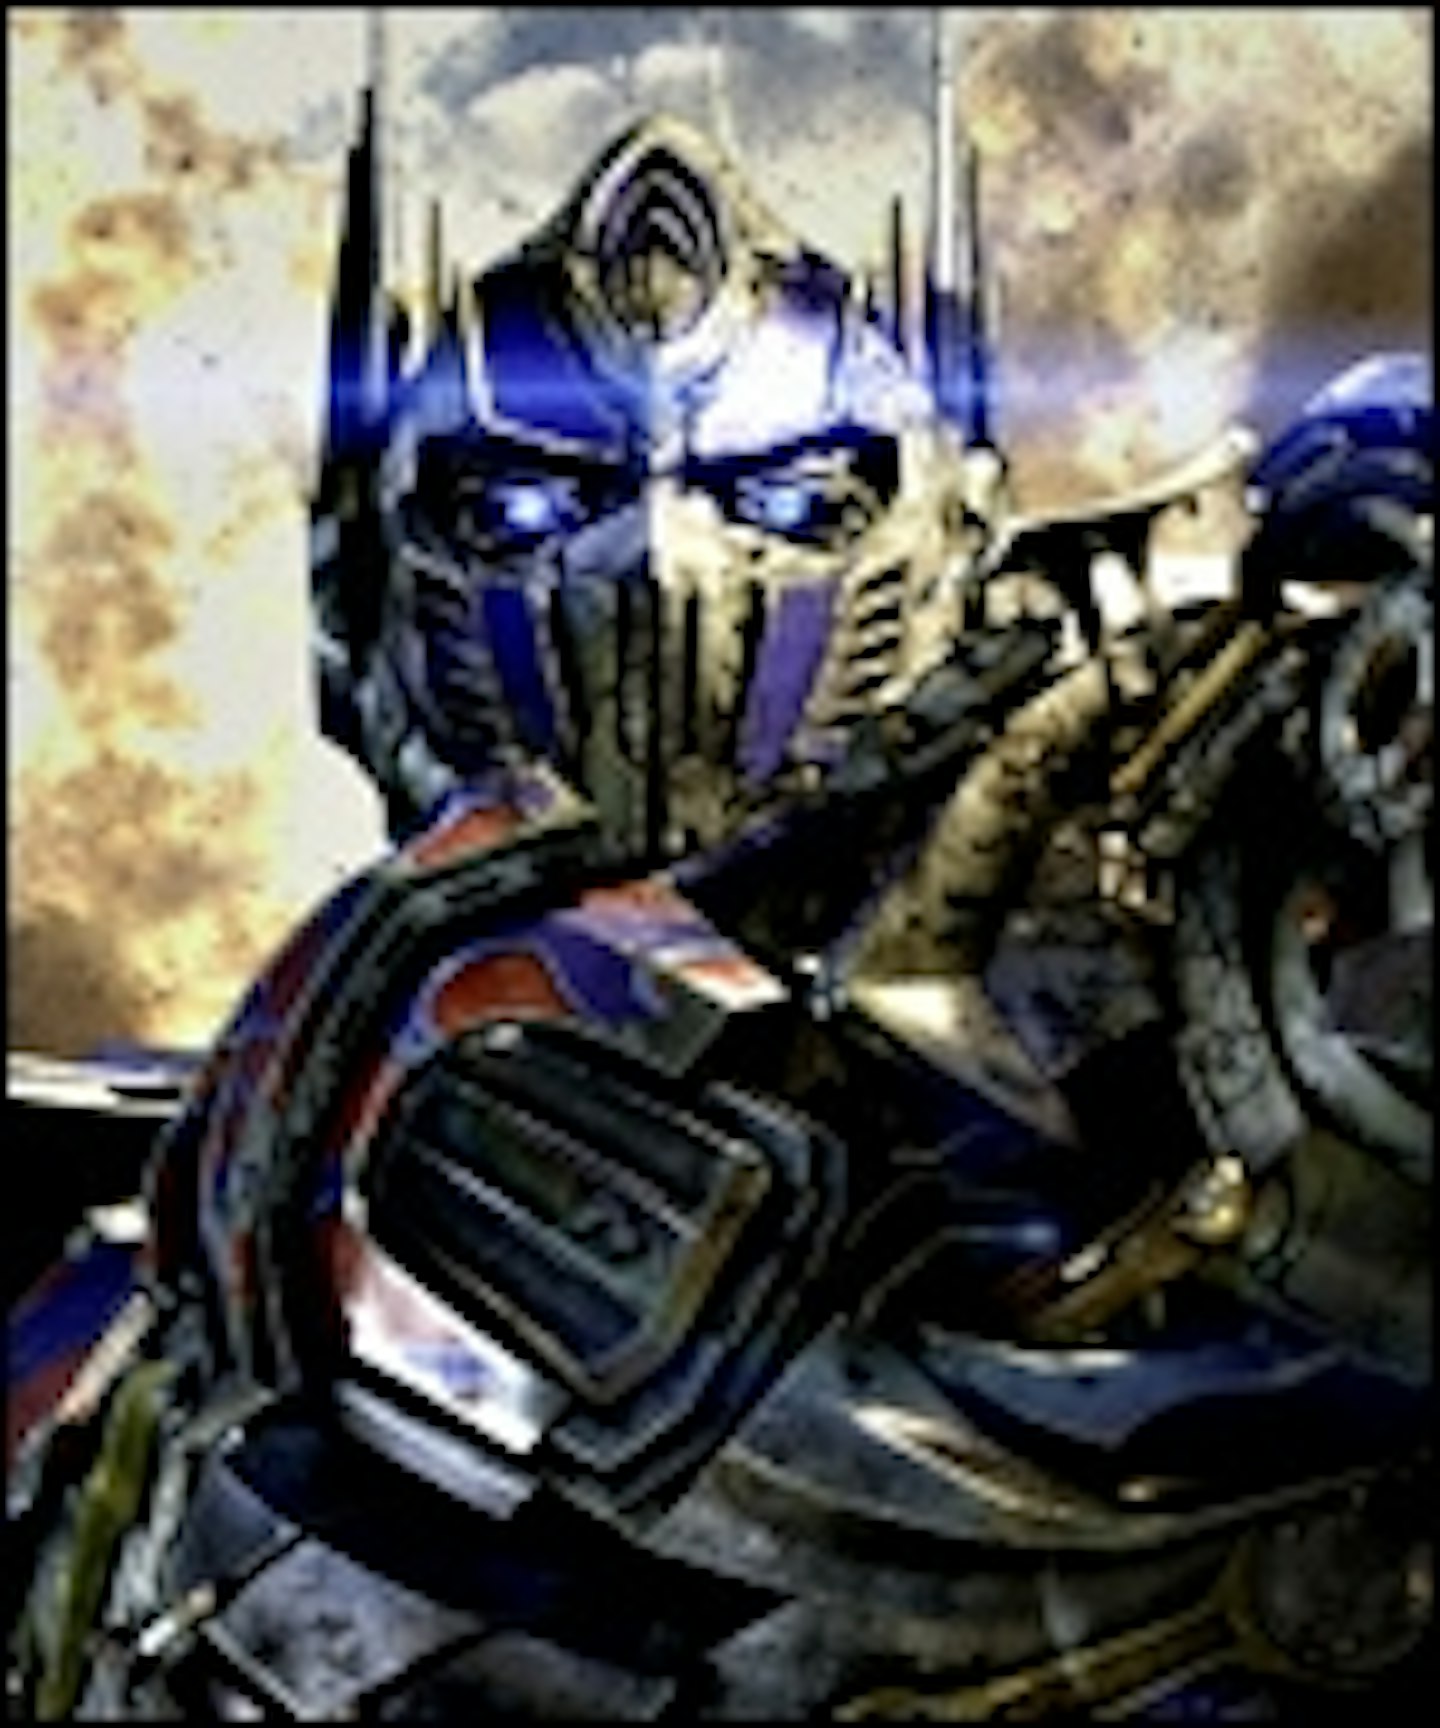 Transformers: Age Of Extinction Super Bowl Spot Brings The Dinobots